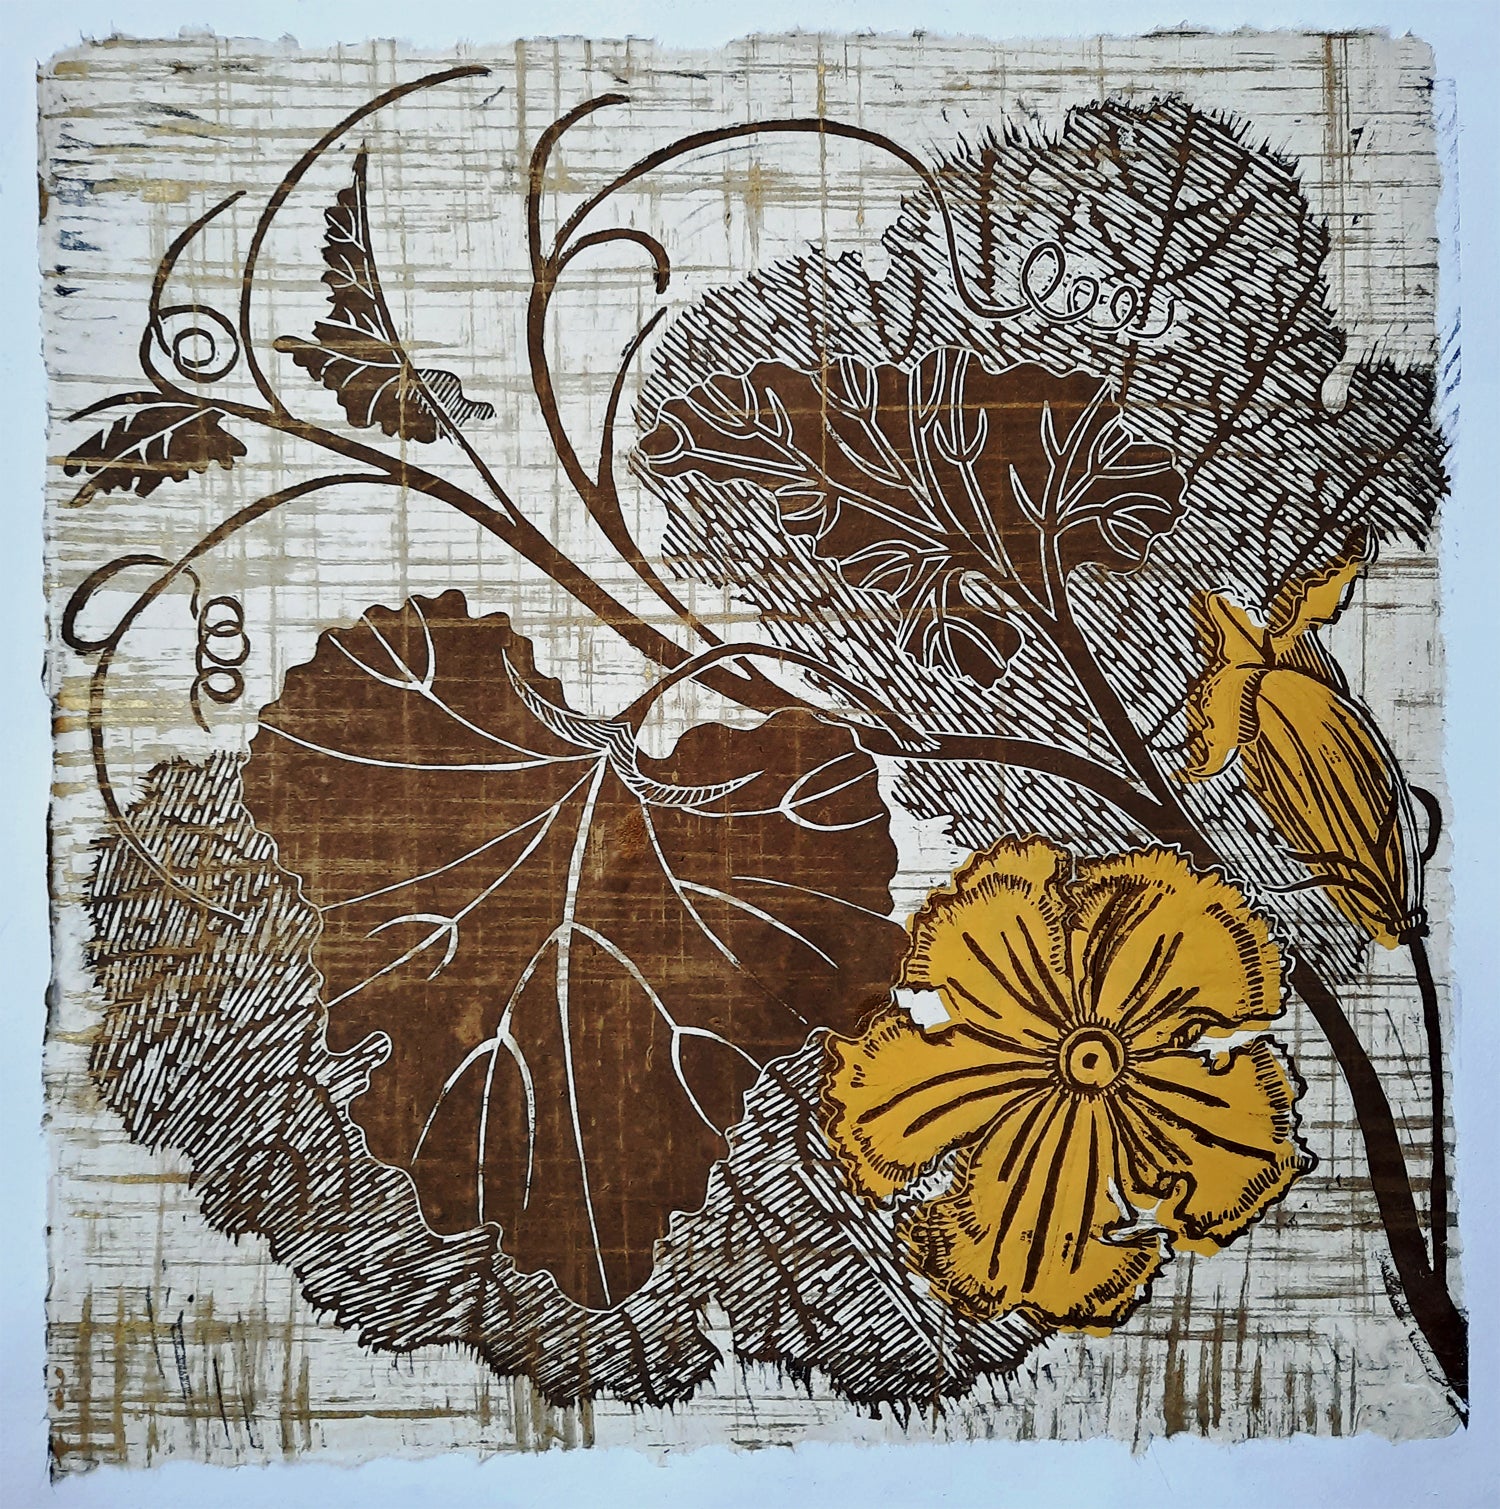 Summer, linocut with chine colle in gold ink over archival hand made papers. for sale by Ouida Touchon, Colorado artist. 